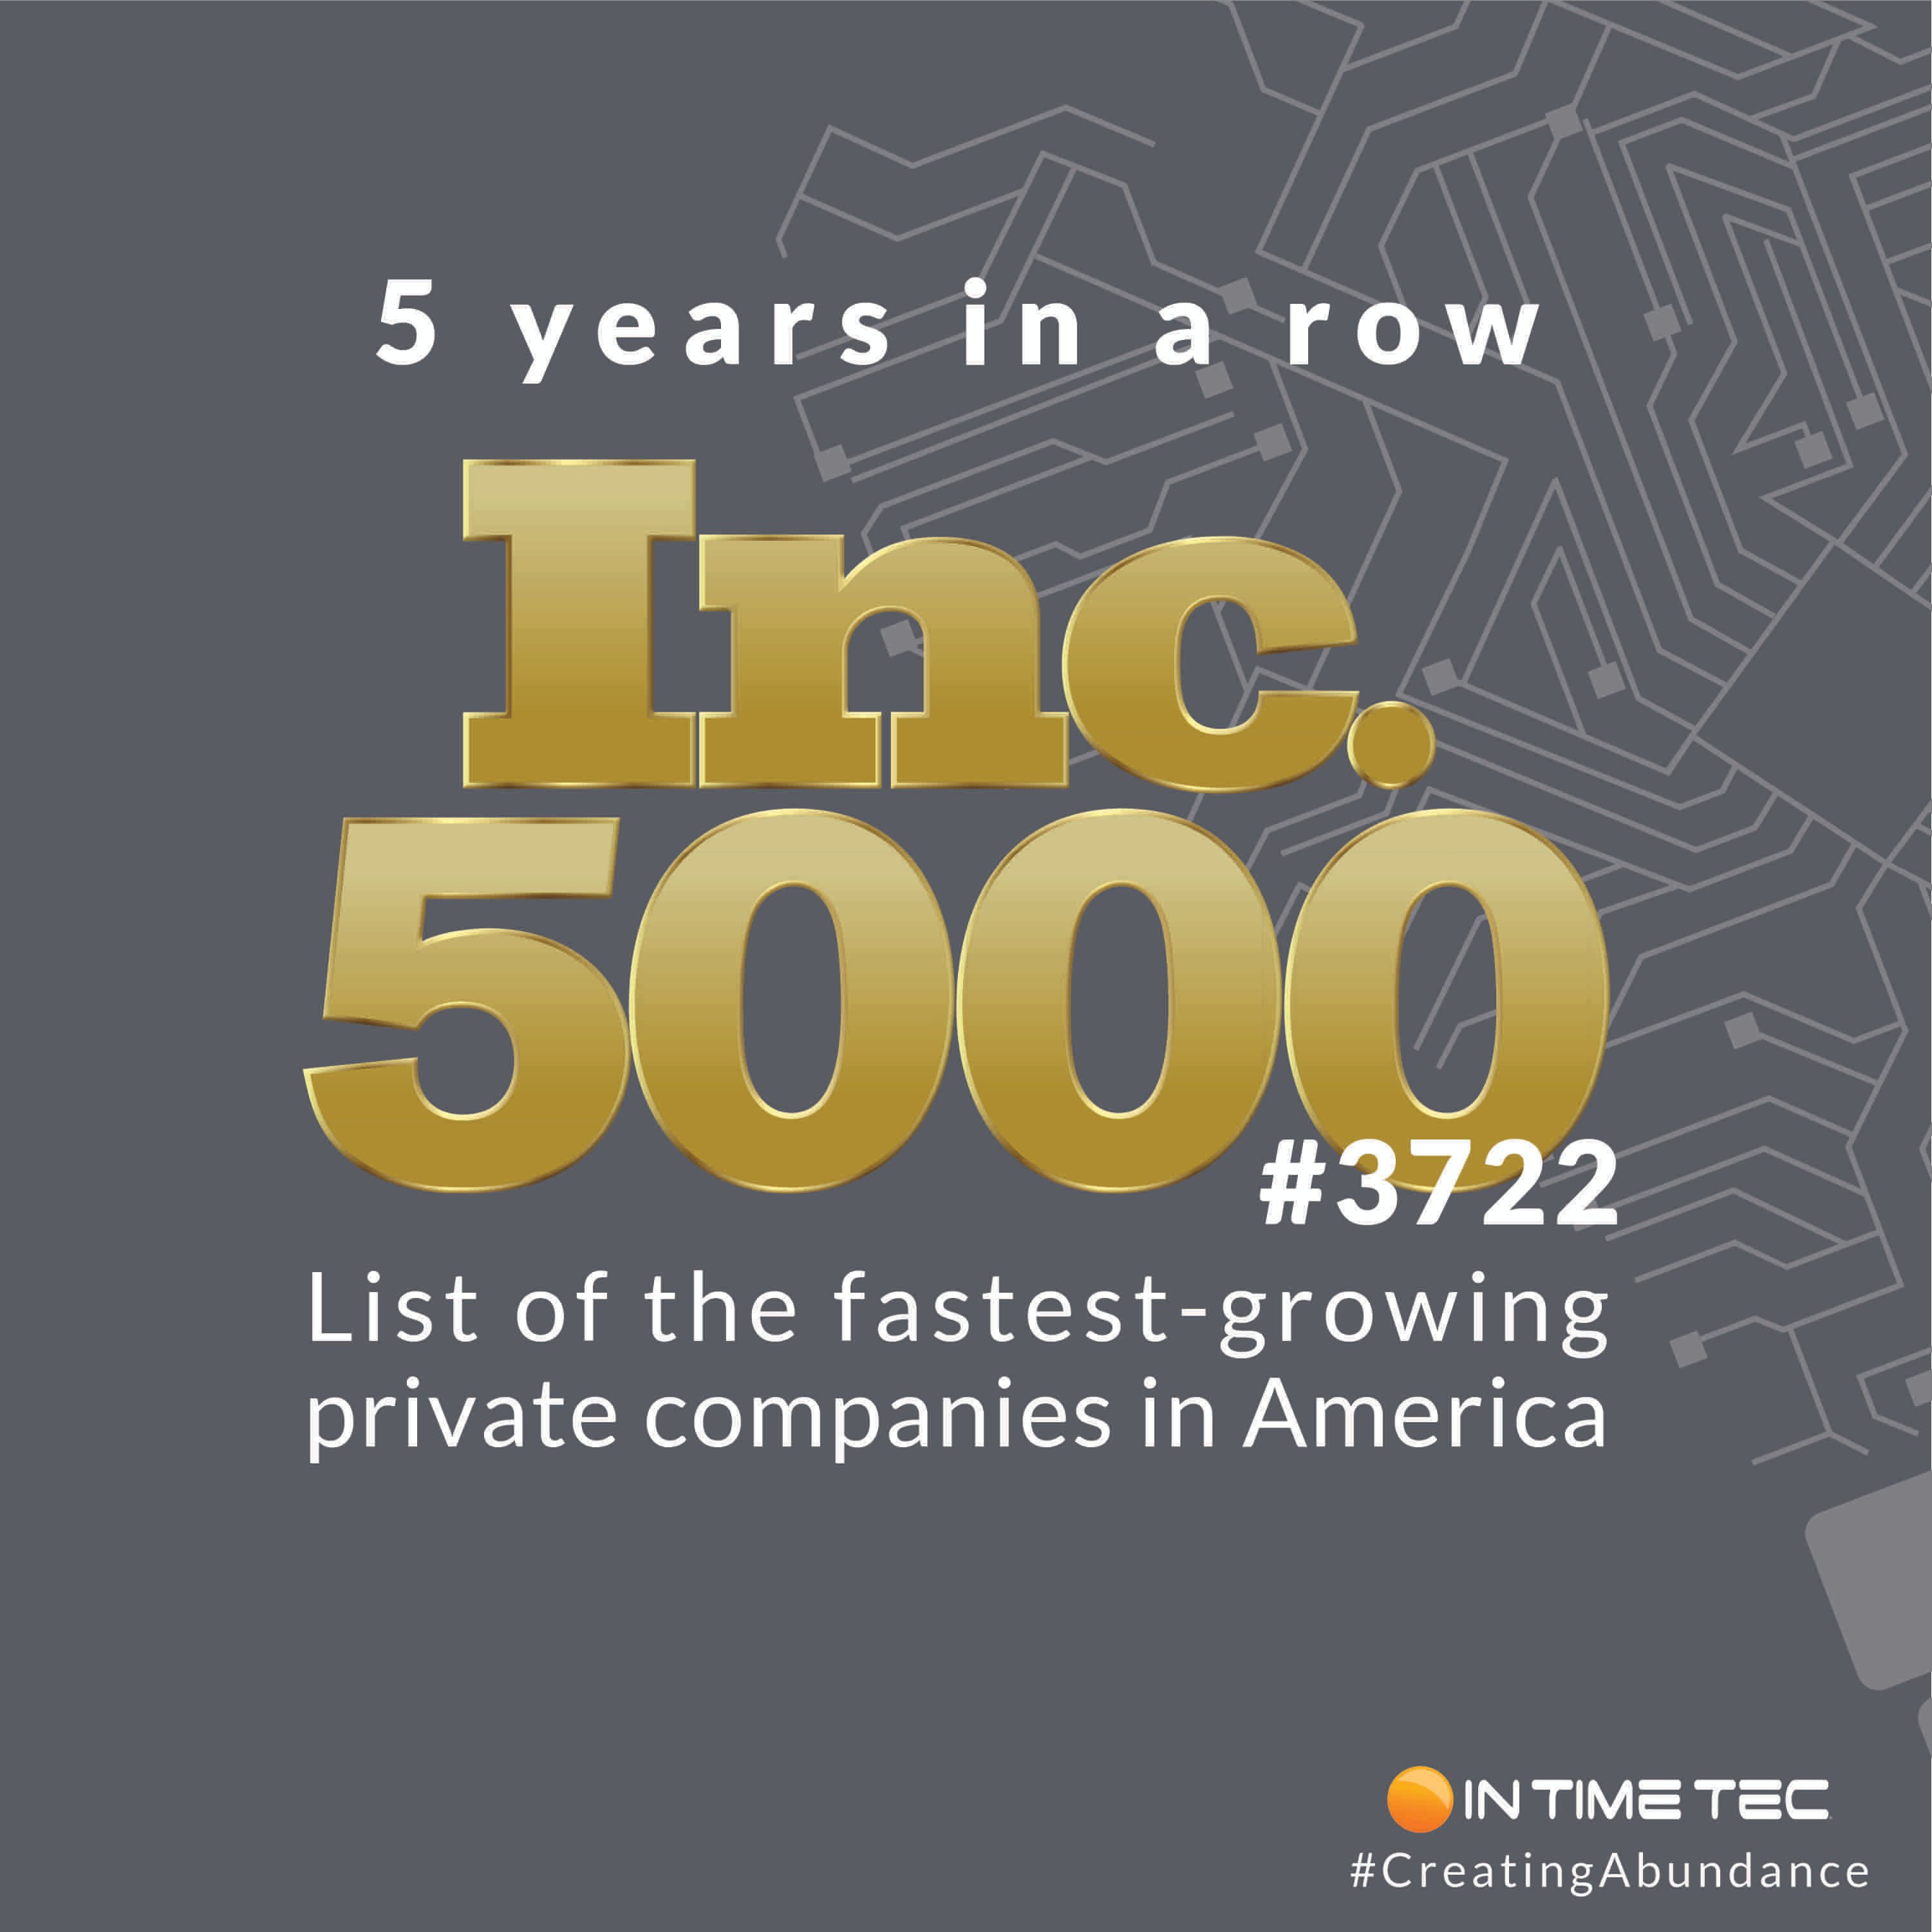 Press Release- For the 5th time, In Time Tec Appears on the INC. 5000, Ranking No. 3722 with a growth rate of 97.75 Percent